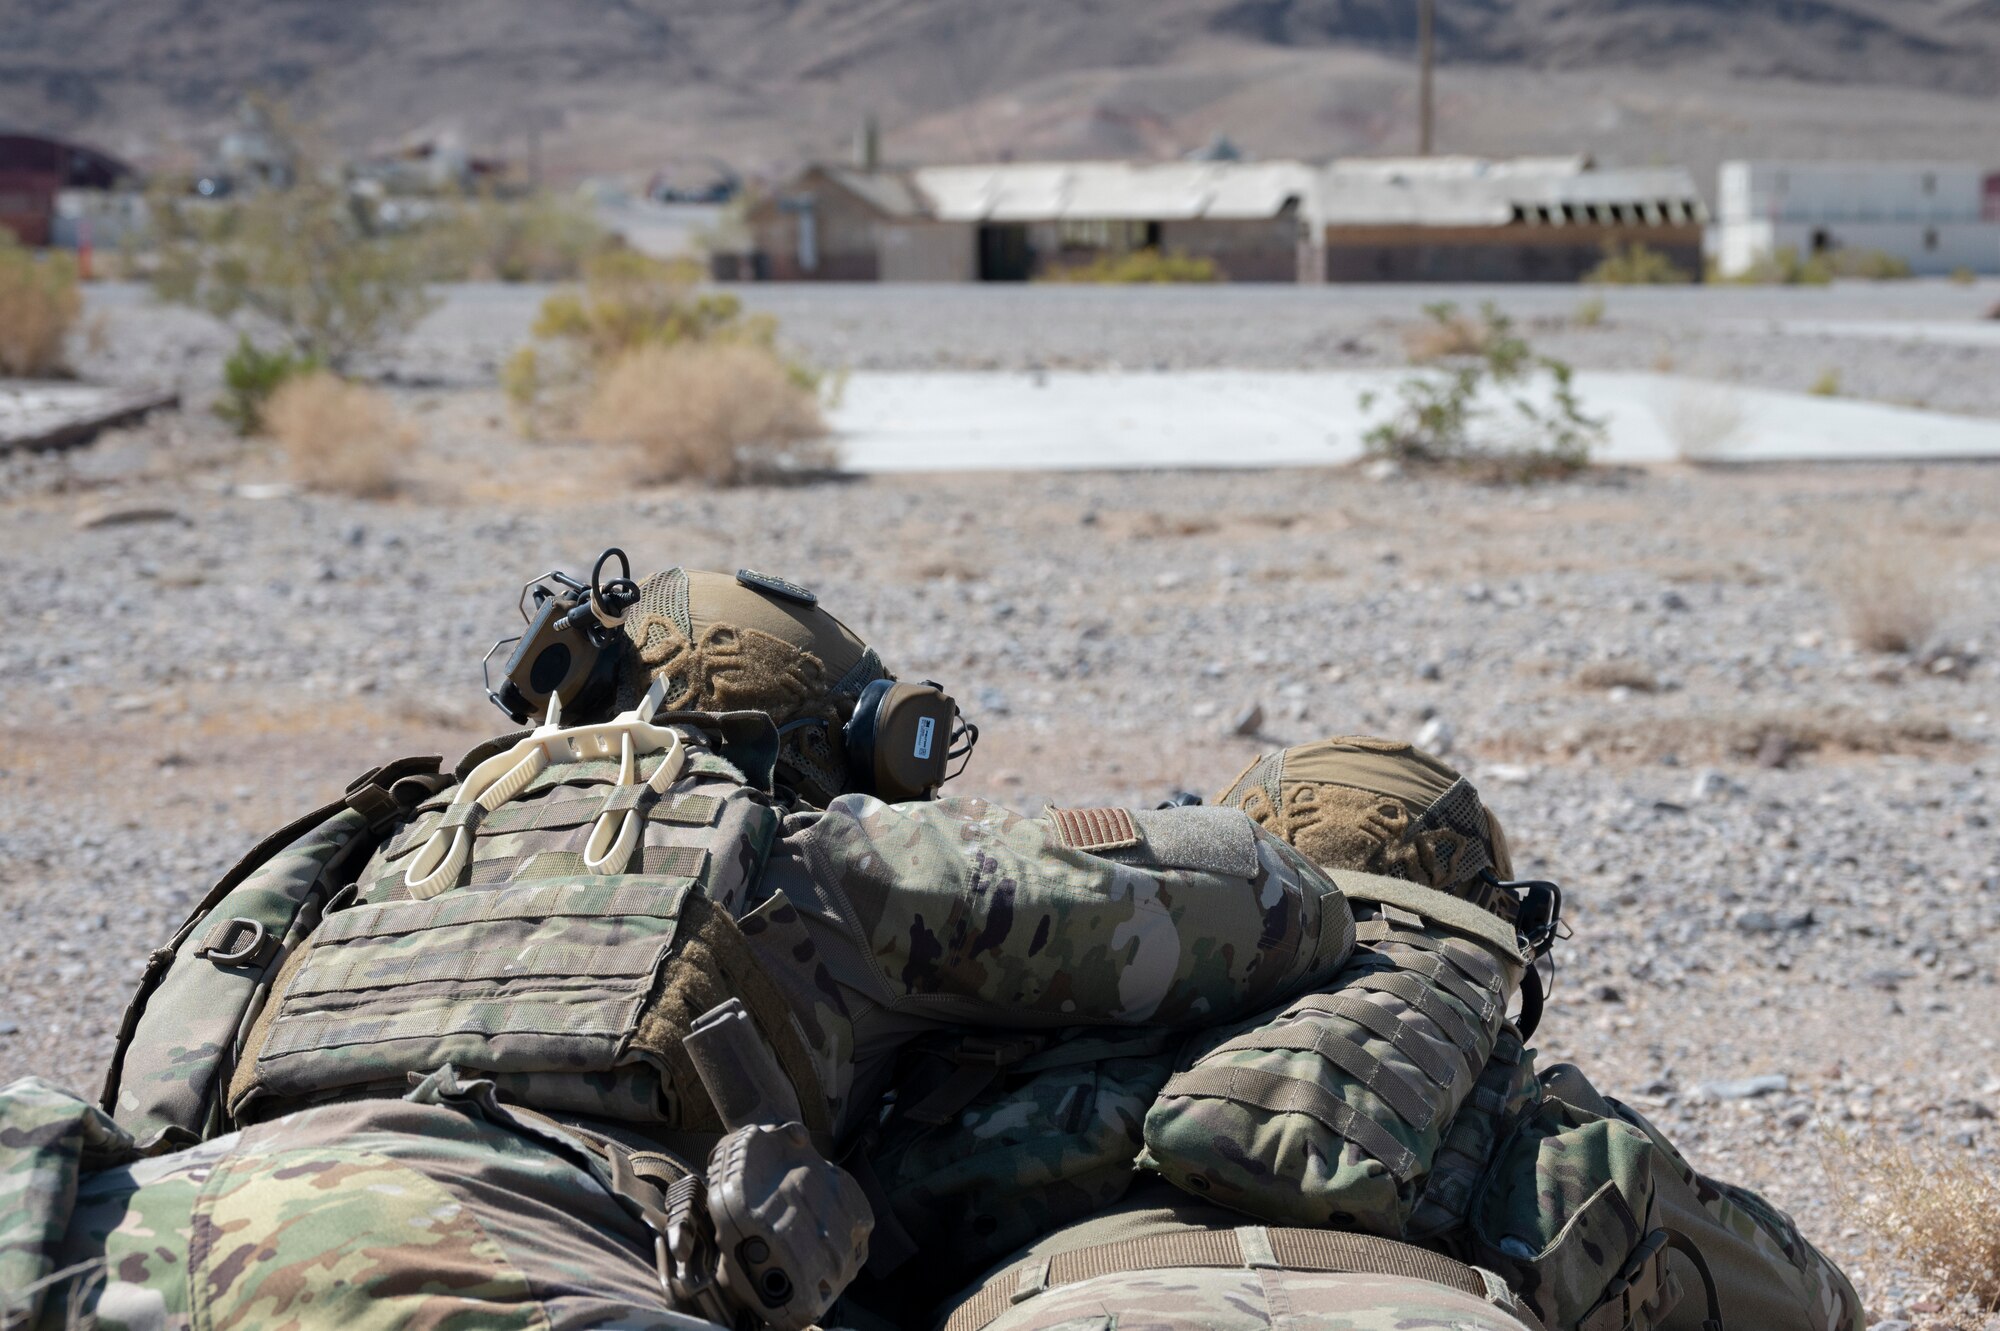 Two U.S. Airmen man a defensive fighting position during an air base defense rehearsal during exercise Red Flag 23-3 at Nellis AFB, Nevada, July 20, 2023. These defenders were establishing security for the forward operating site and contingency locations necessary to perform Agile Combat Employment. (U.S. Air Force photo by Master Sgt. Niles Bartram)